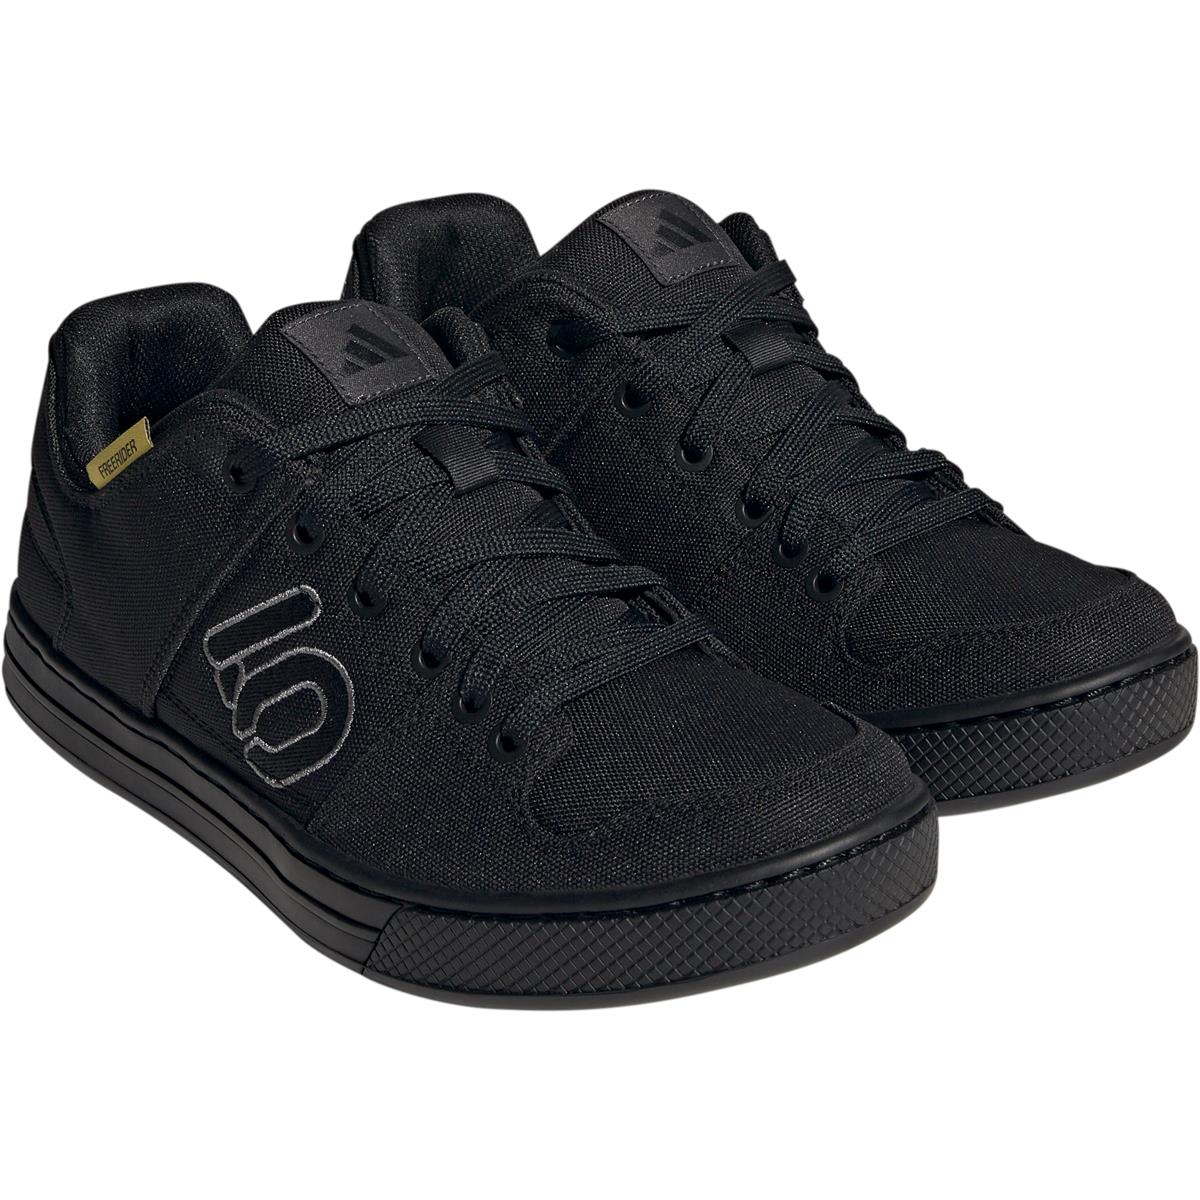 Five Ten Chaussures VTT Freerider Canvas Core Black/DGH Solid Gray/Gray Five